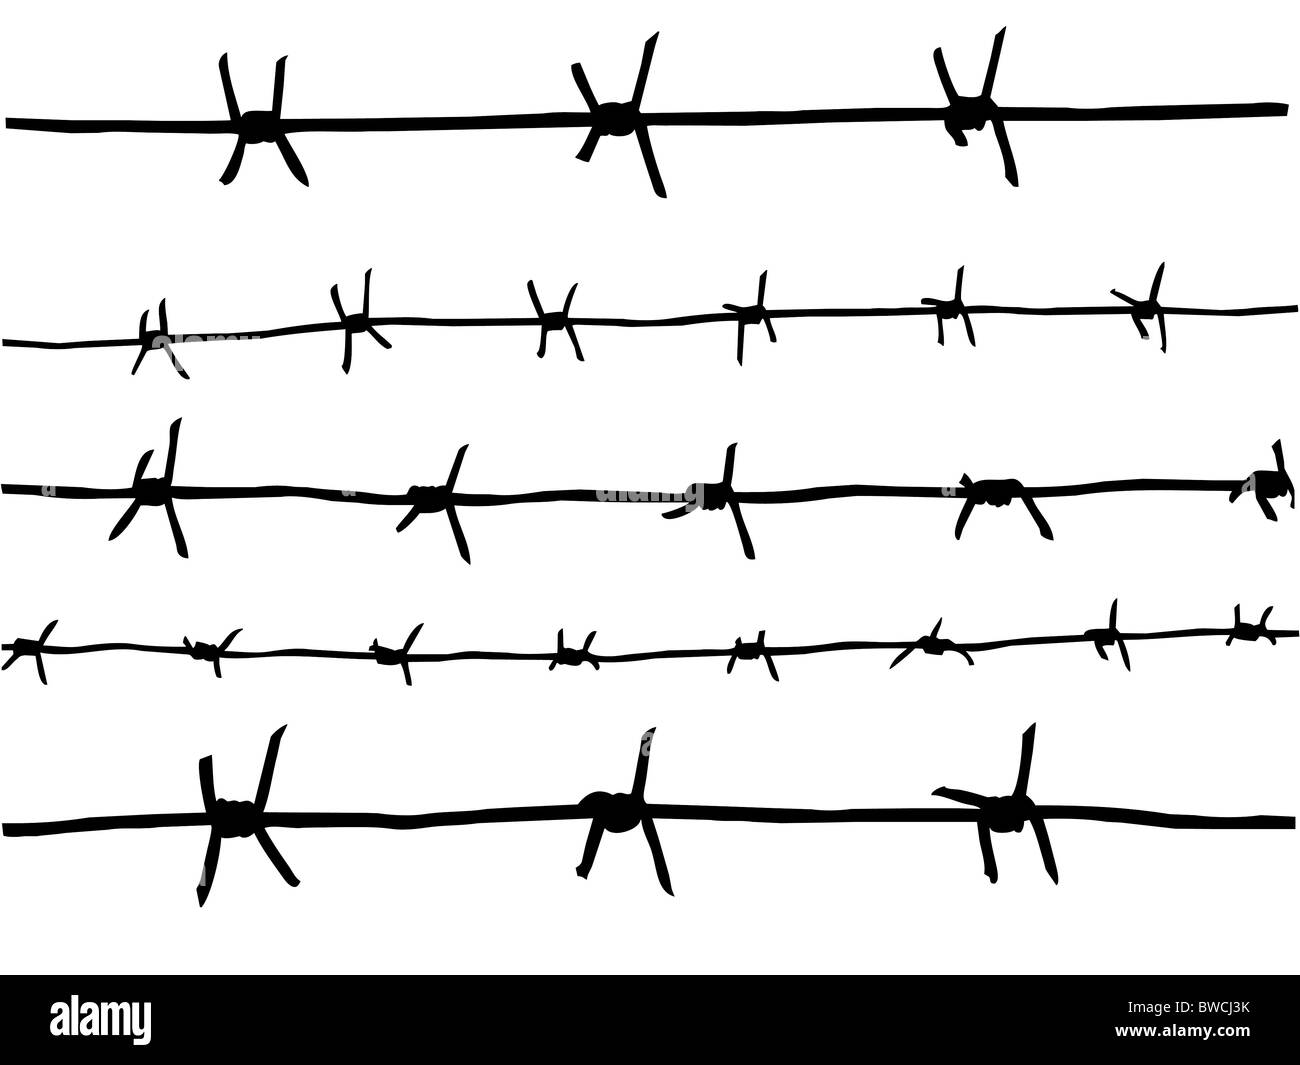 vector drawing of the barbed wire Stock Photo - Alamy